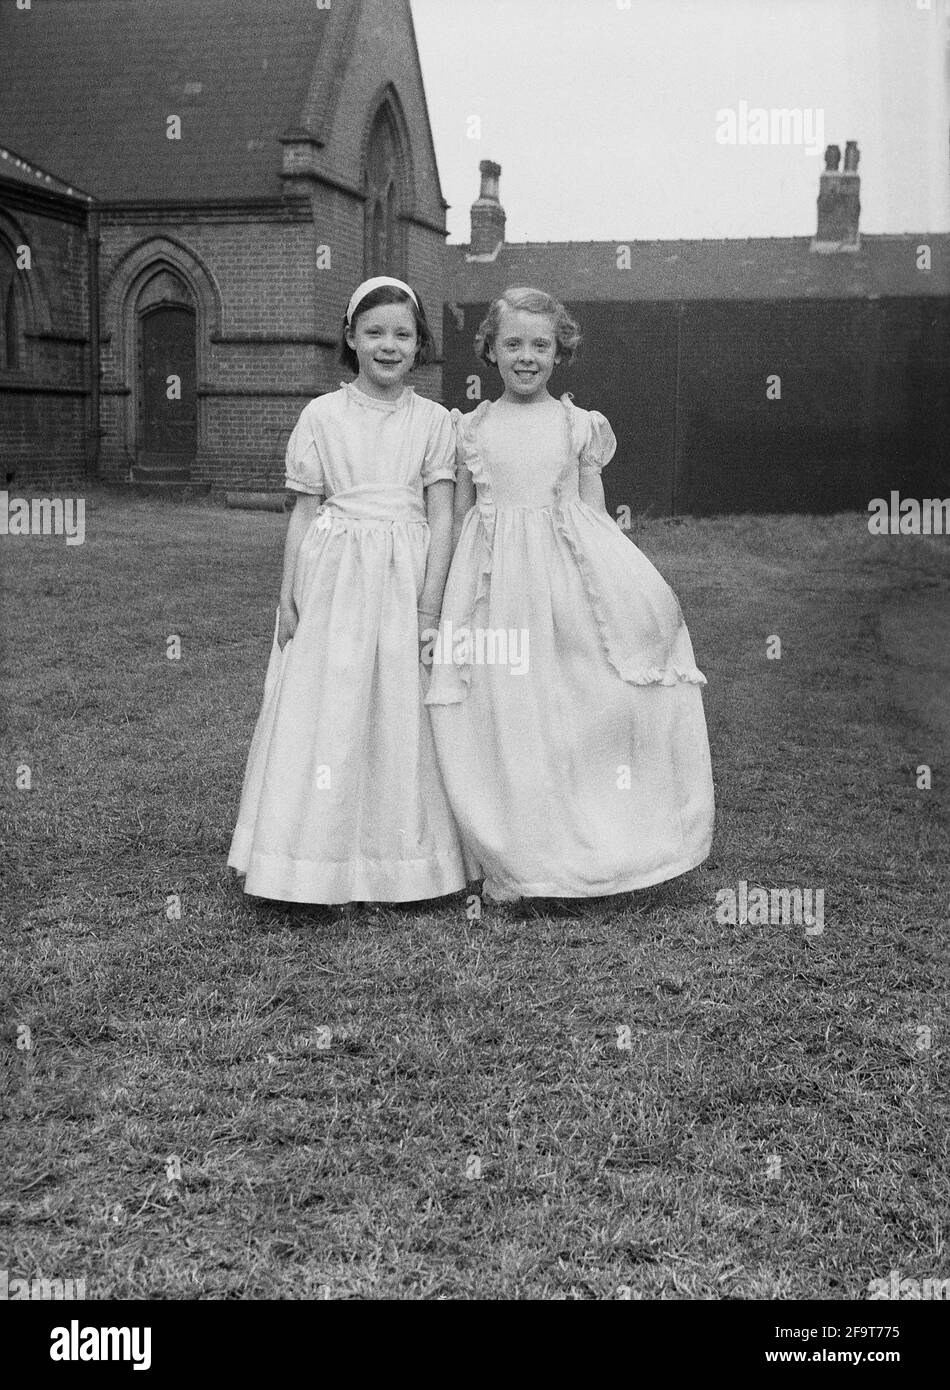 1956, historical, outside in the grounds of a church,standing for a photo,  two young girls in their pretty gowns they will wear in the traditional May Queen procession, England, UK. May Day is an ancient festival of Spring and celebrations , including Morris Dancing, the crowning of a May Queen and dancing around a Maypole having taken place in England for centuries. Selected from the girls of the area to lead the May Day parade, the May Queen wearing a crown, would start the celebrations and in the North of England, the Church Sunday Schools led the organisation of the day. Stock Photo